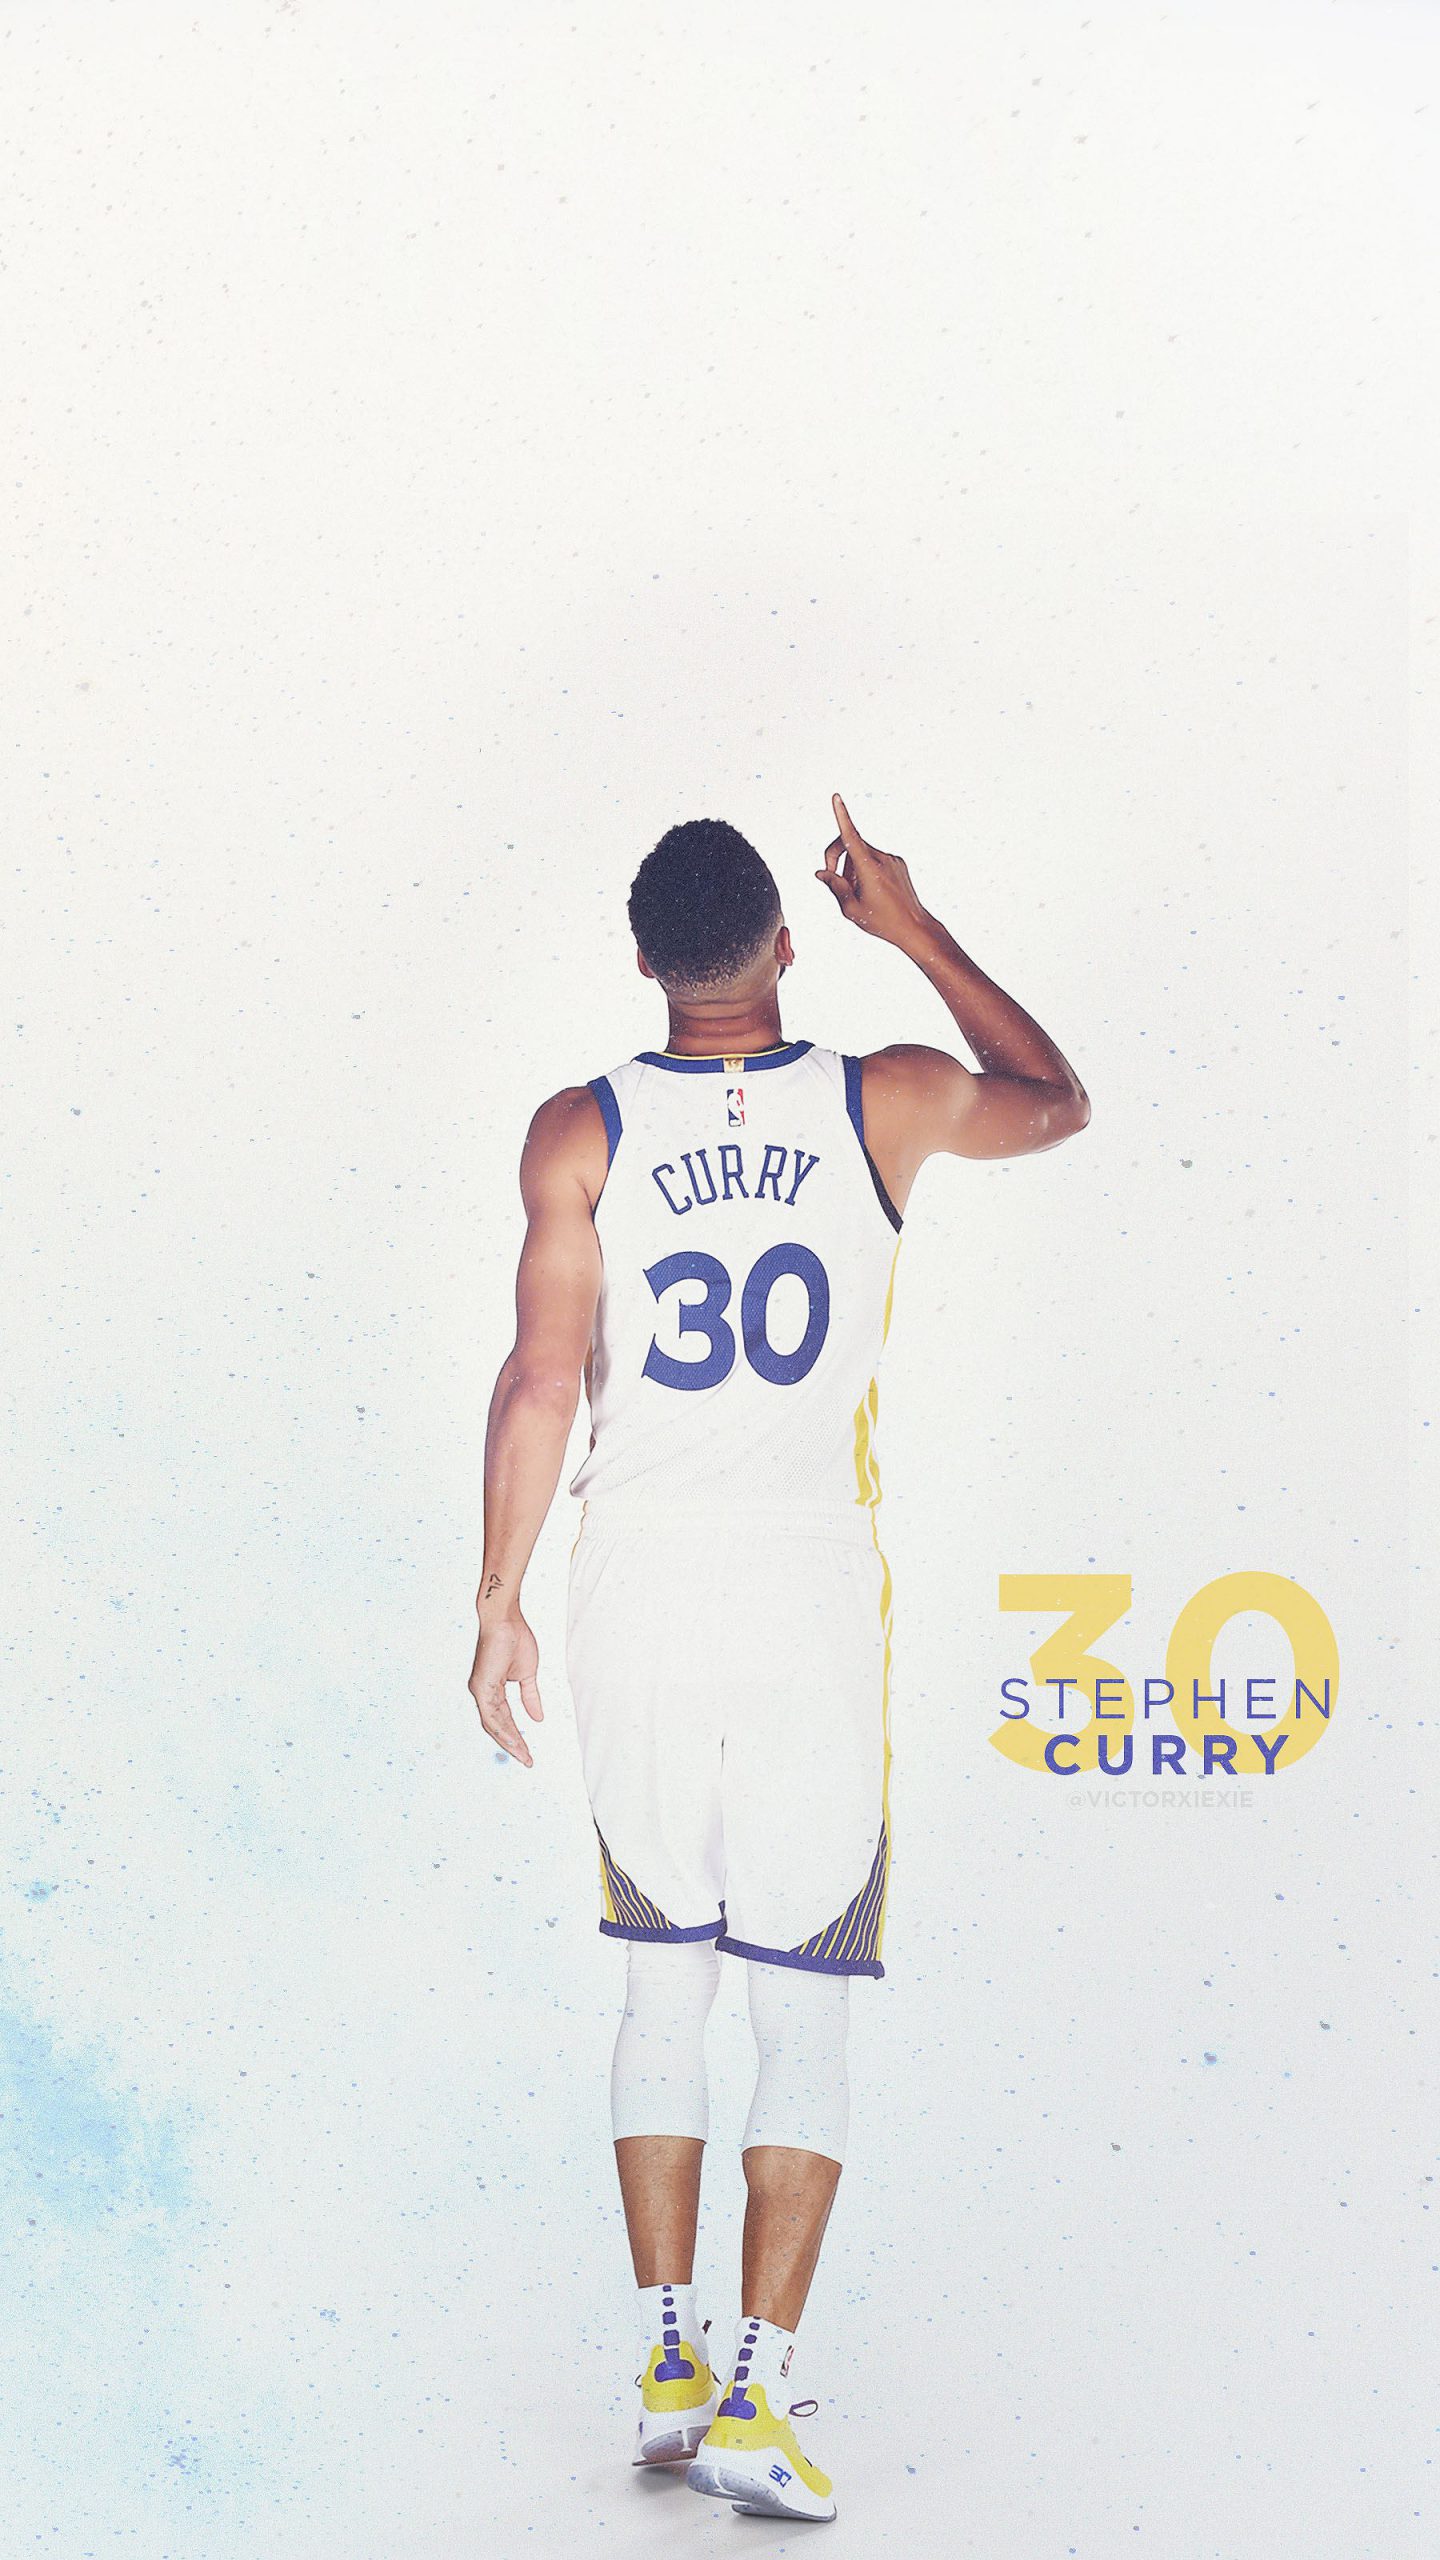 Stephen Curry Iphone Wallpaper - KoLPaPer - Awesome Free ...